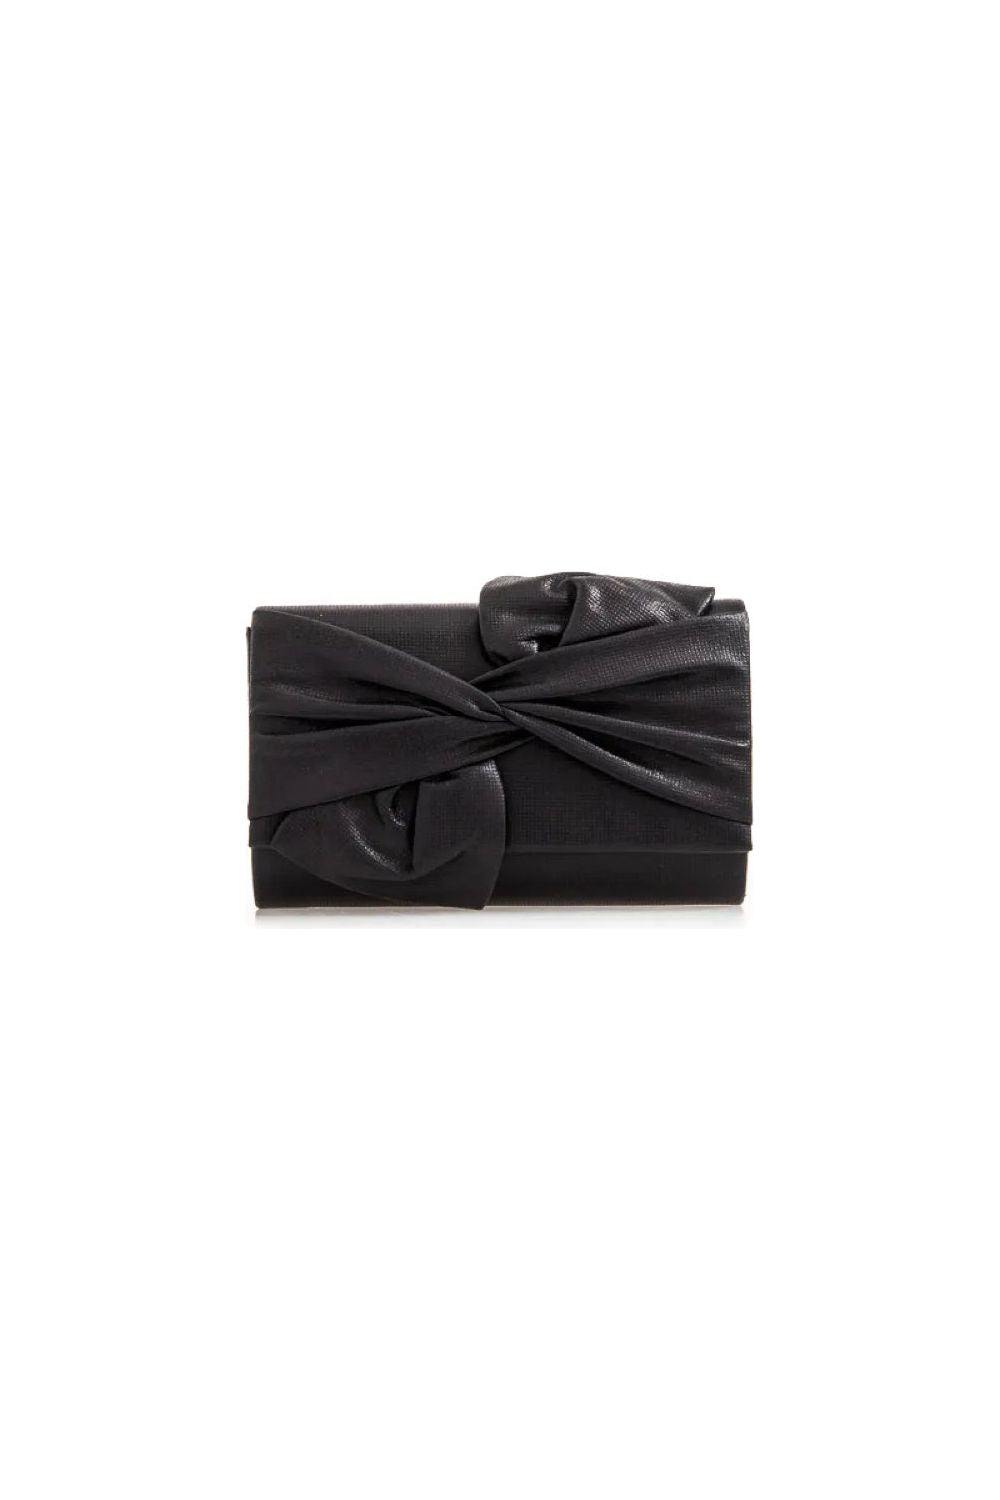 Black Evening Clutch Bag With Bow Detail ALW2562